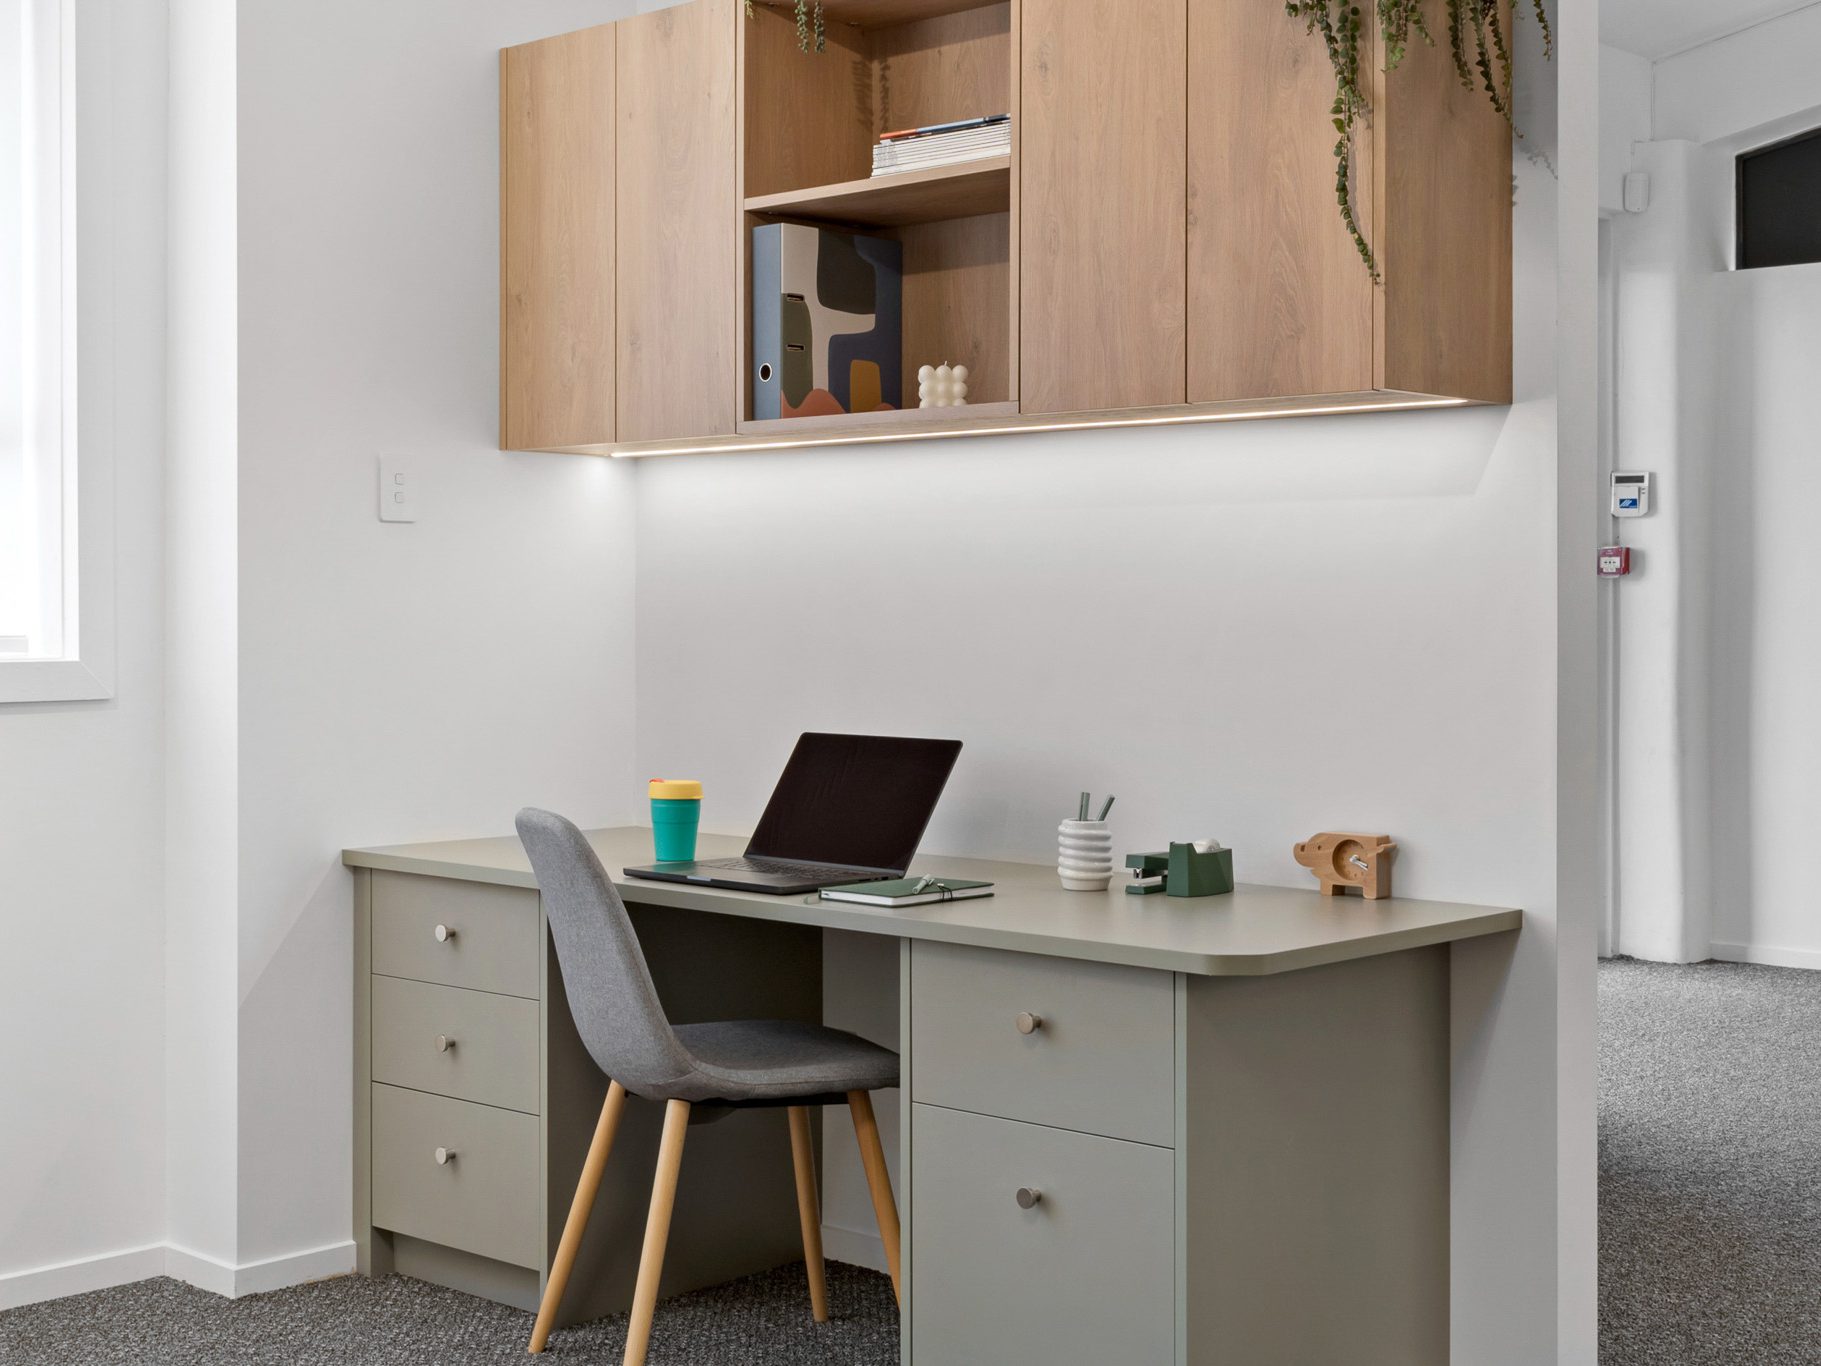 Office desk and home storage shelvng cupboard